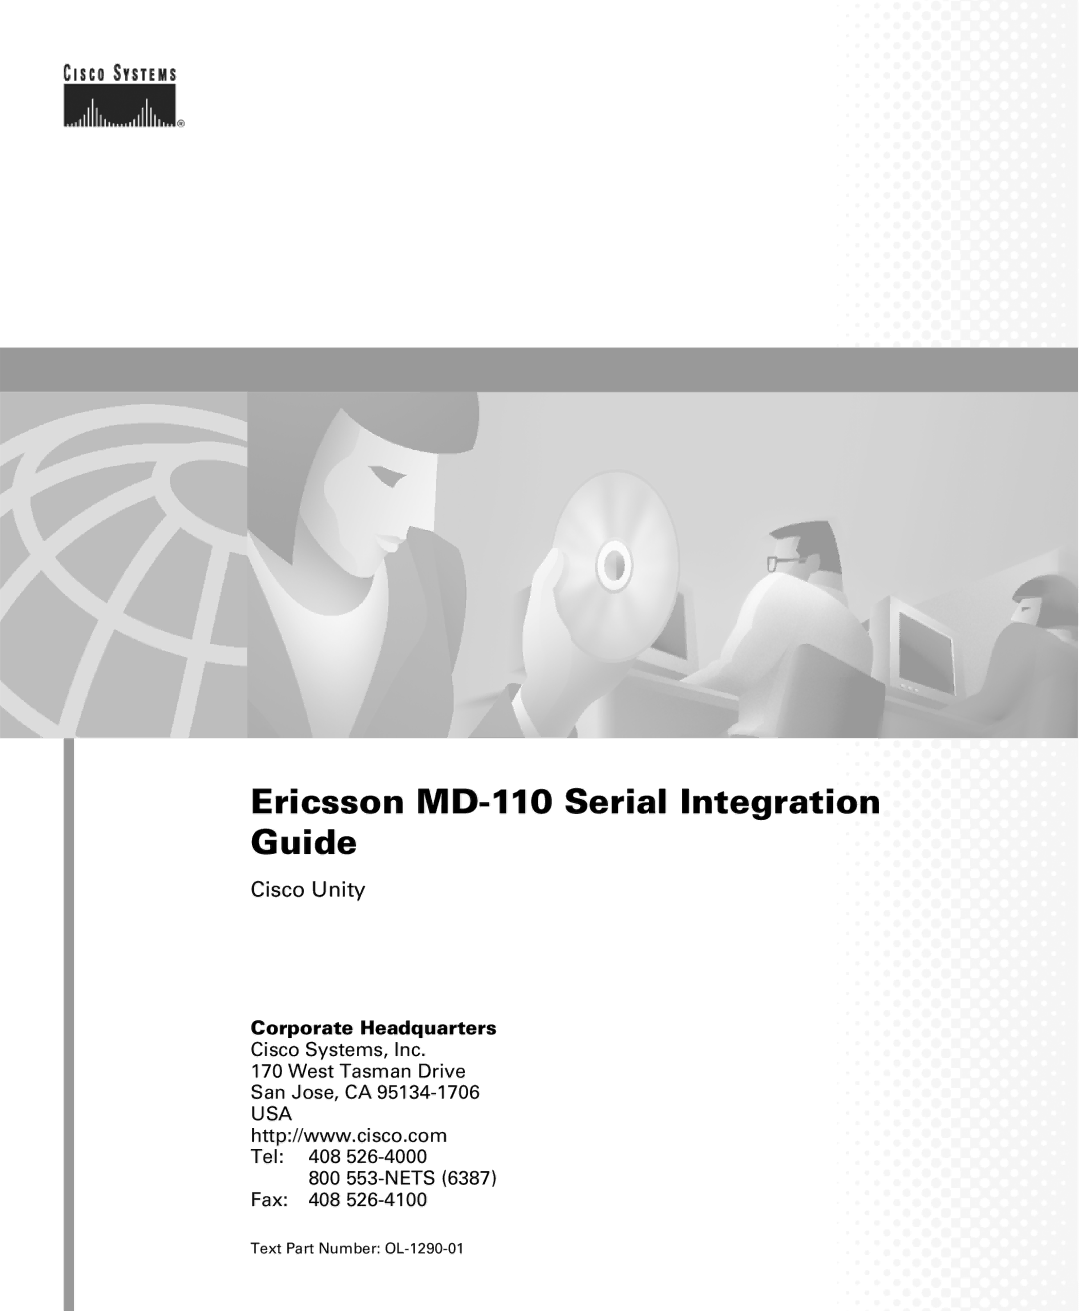 Cisco Systems manual Ericsson MD-110 Serial Integration Guide 